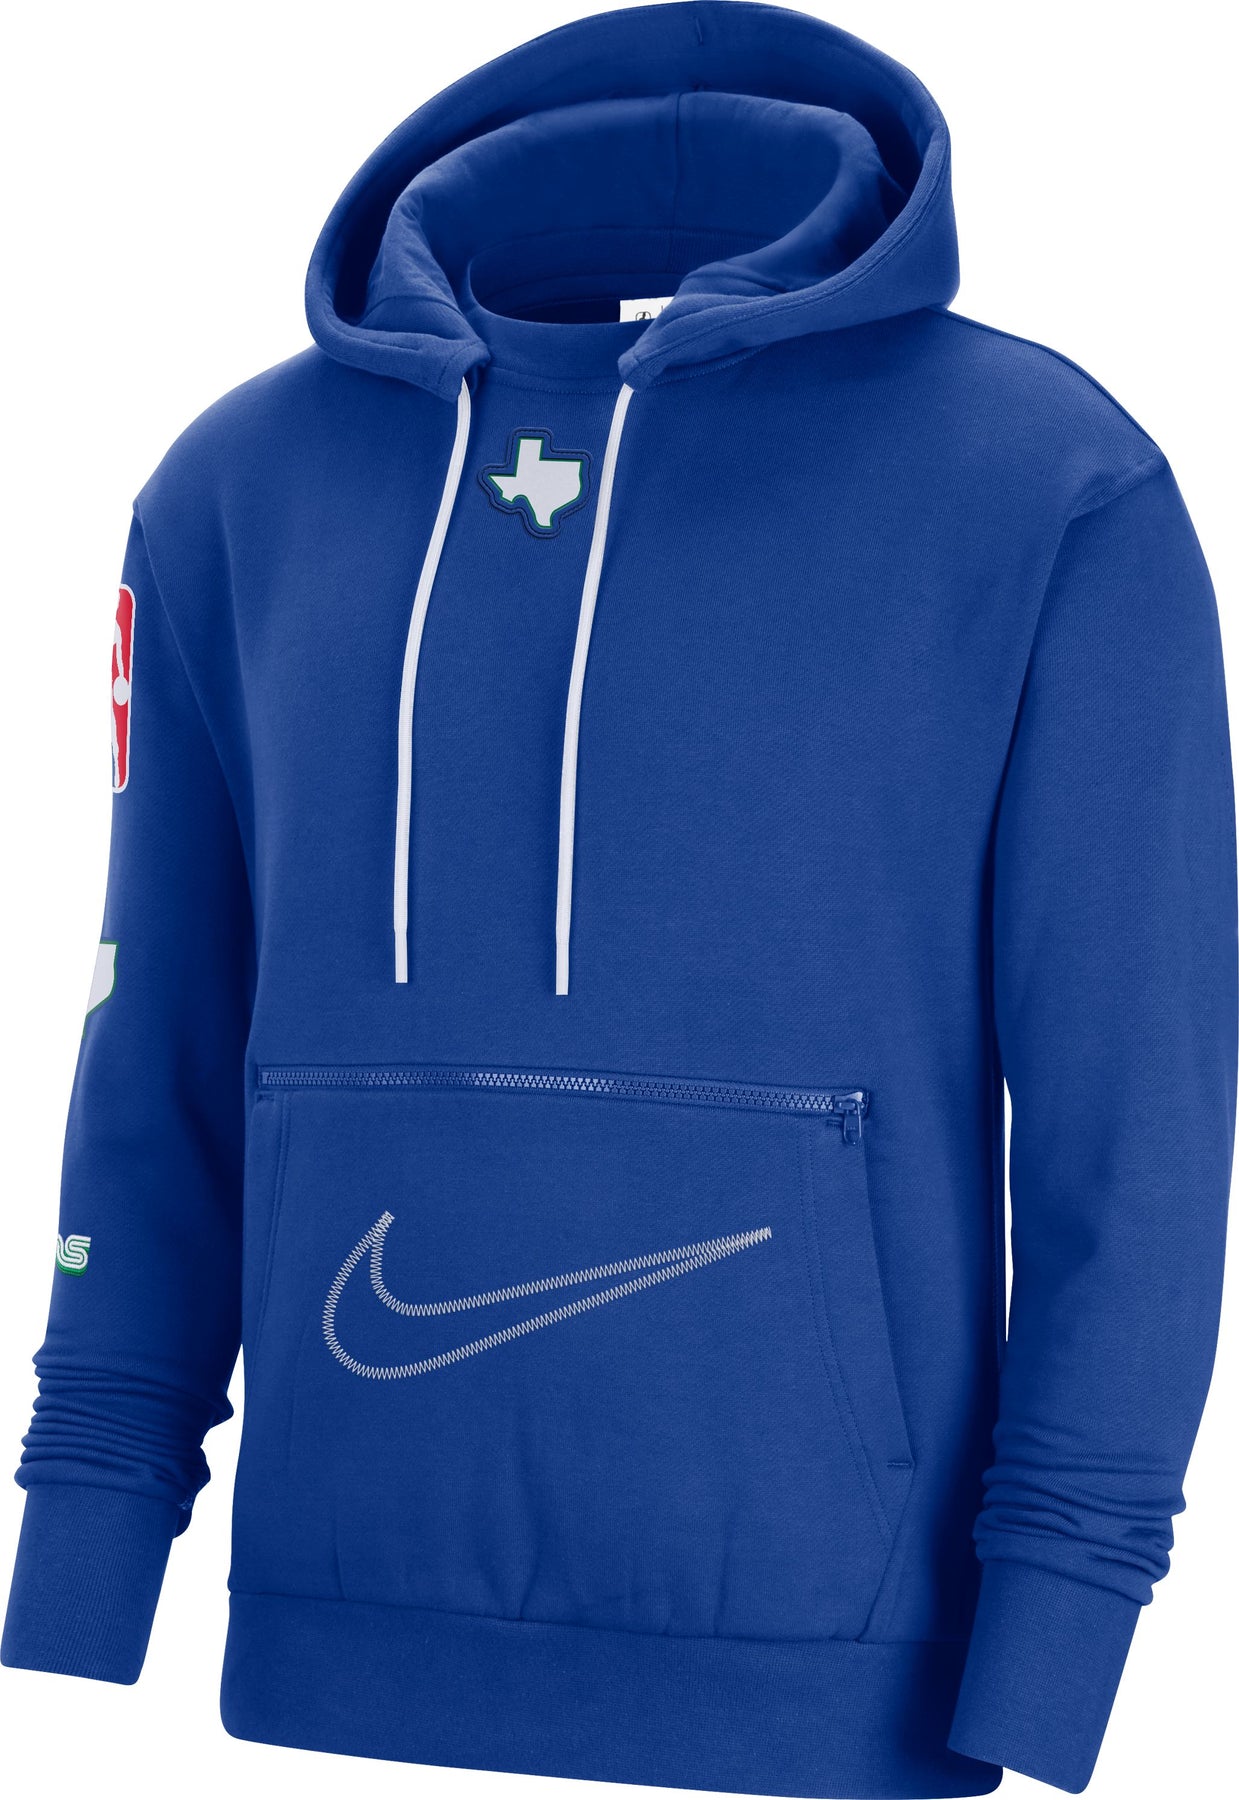 Boston Red Sox Nike City Connect Therma Hoodie - Youth